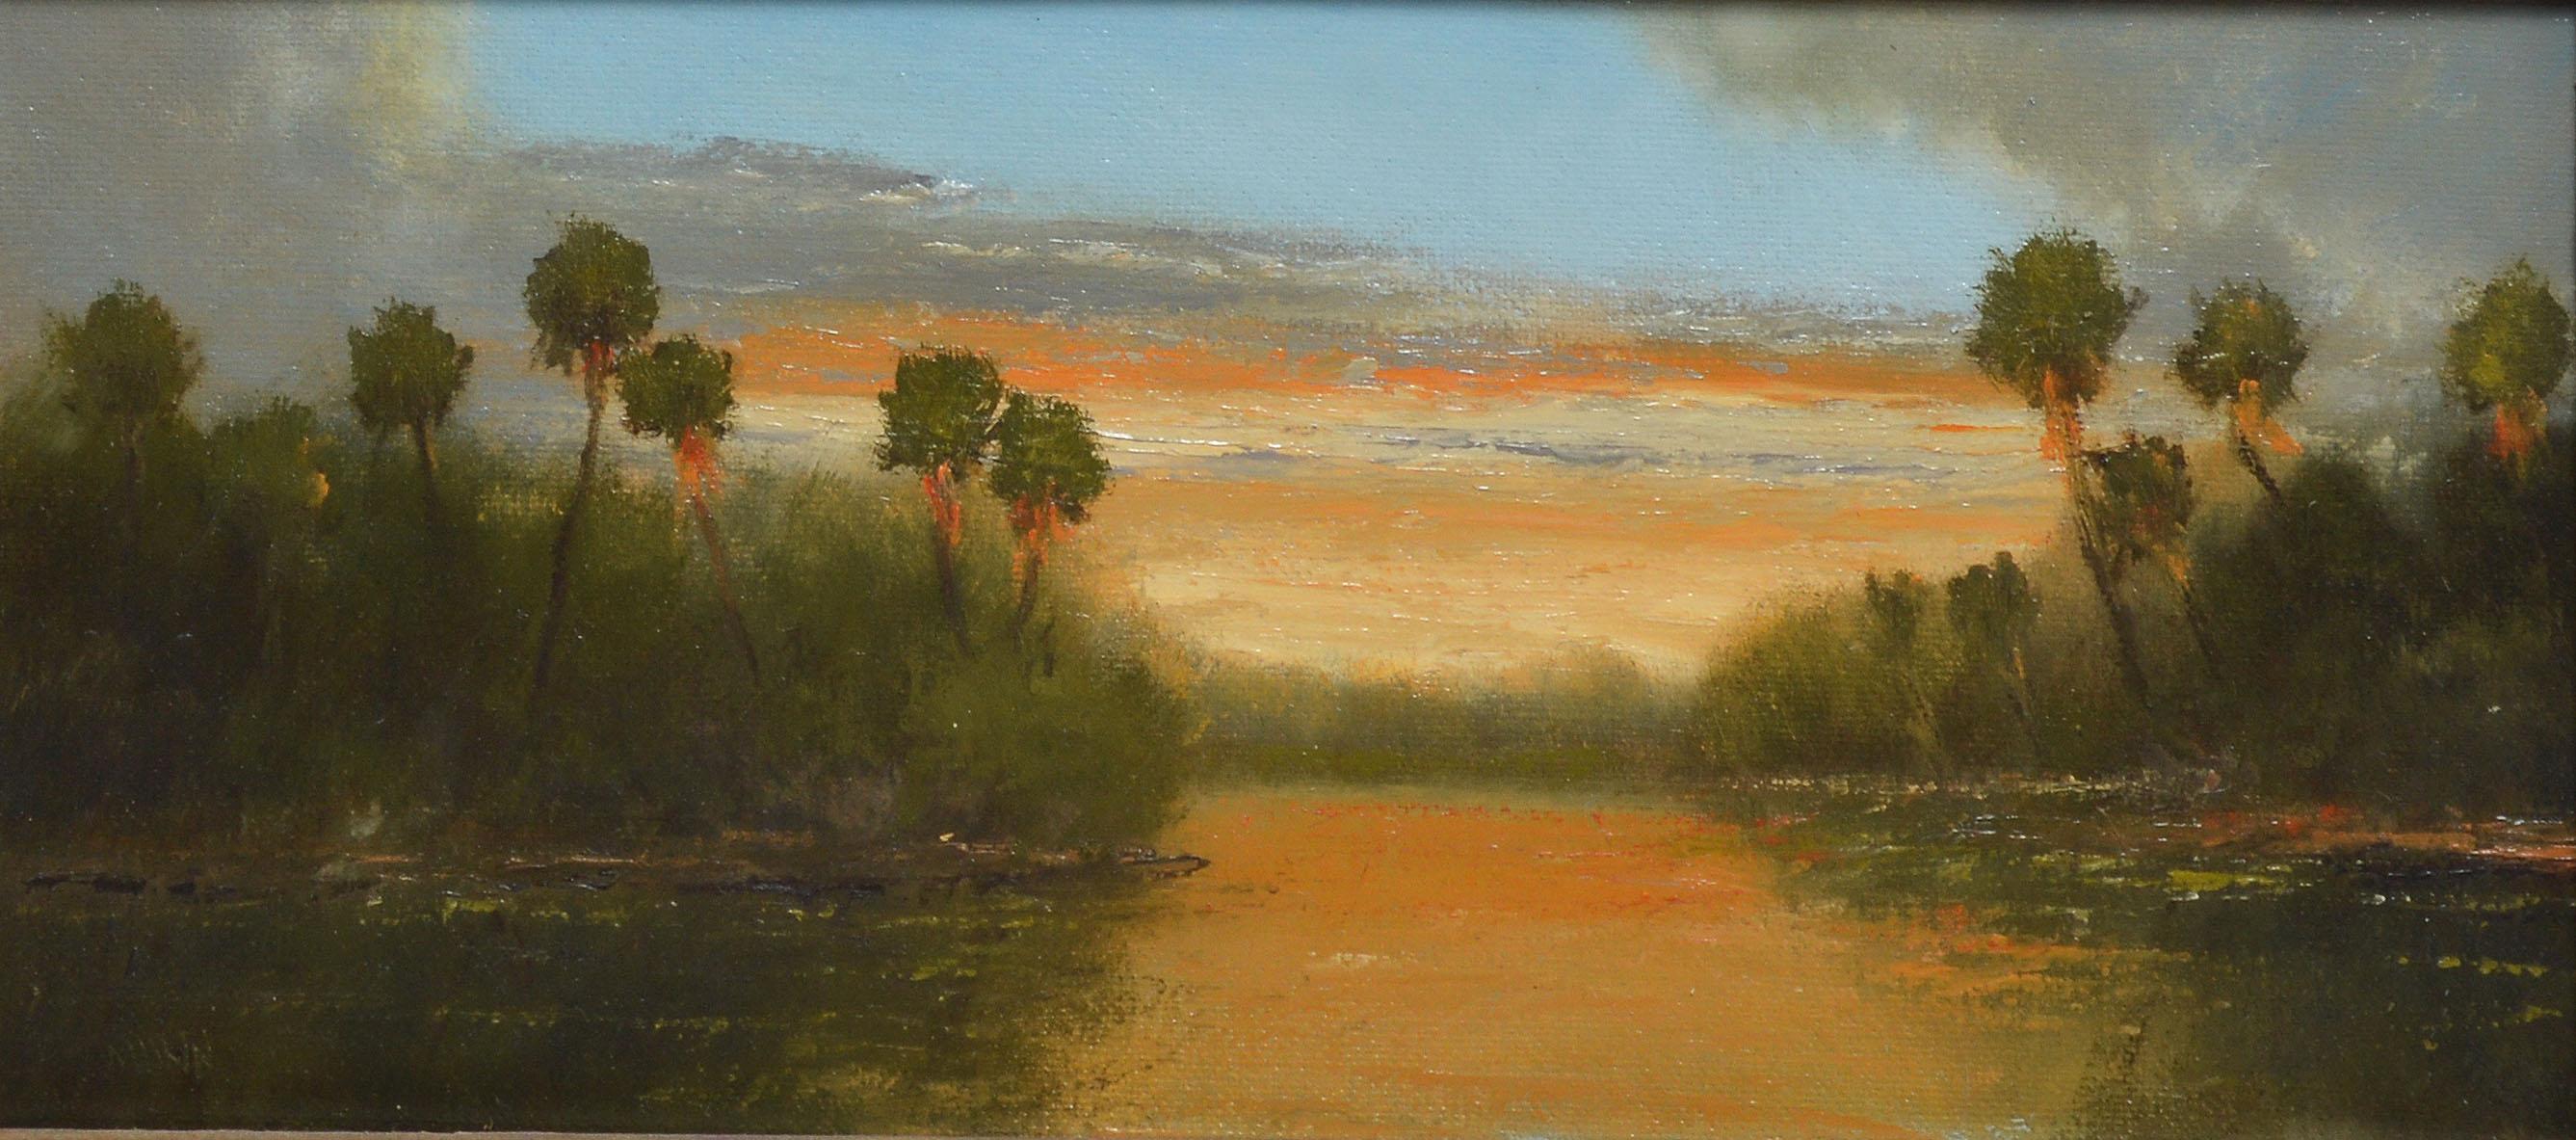 Sunset over the Everglades - Impressionist Painting by Unknown